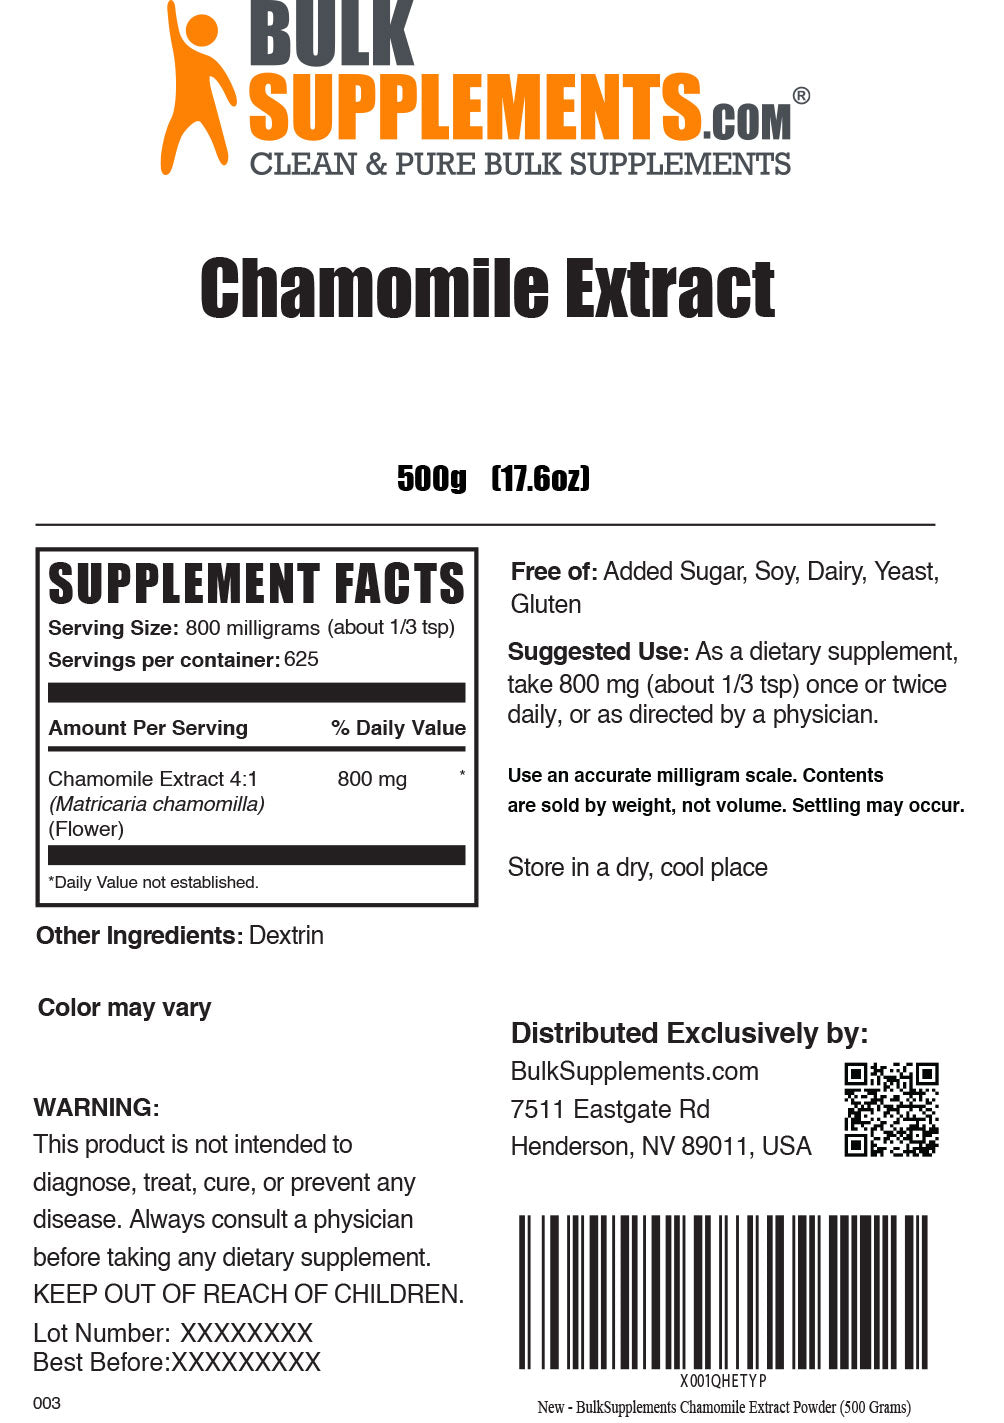 500g of chamomile extract supplement facts label